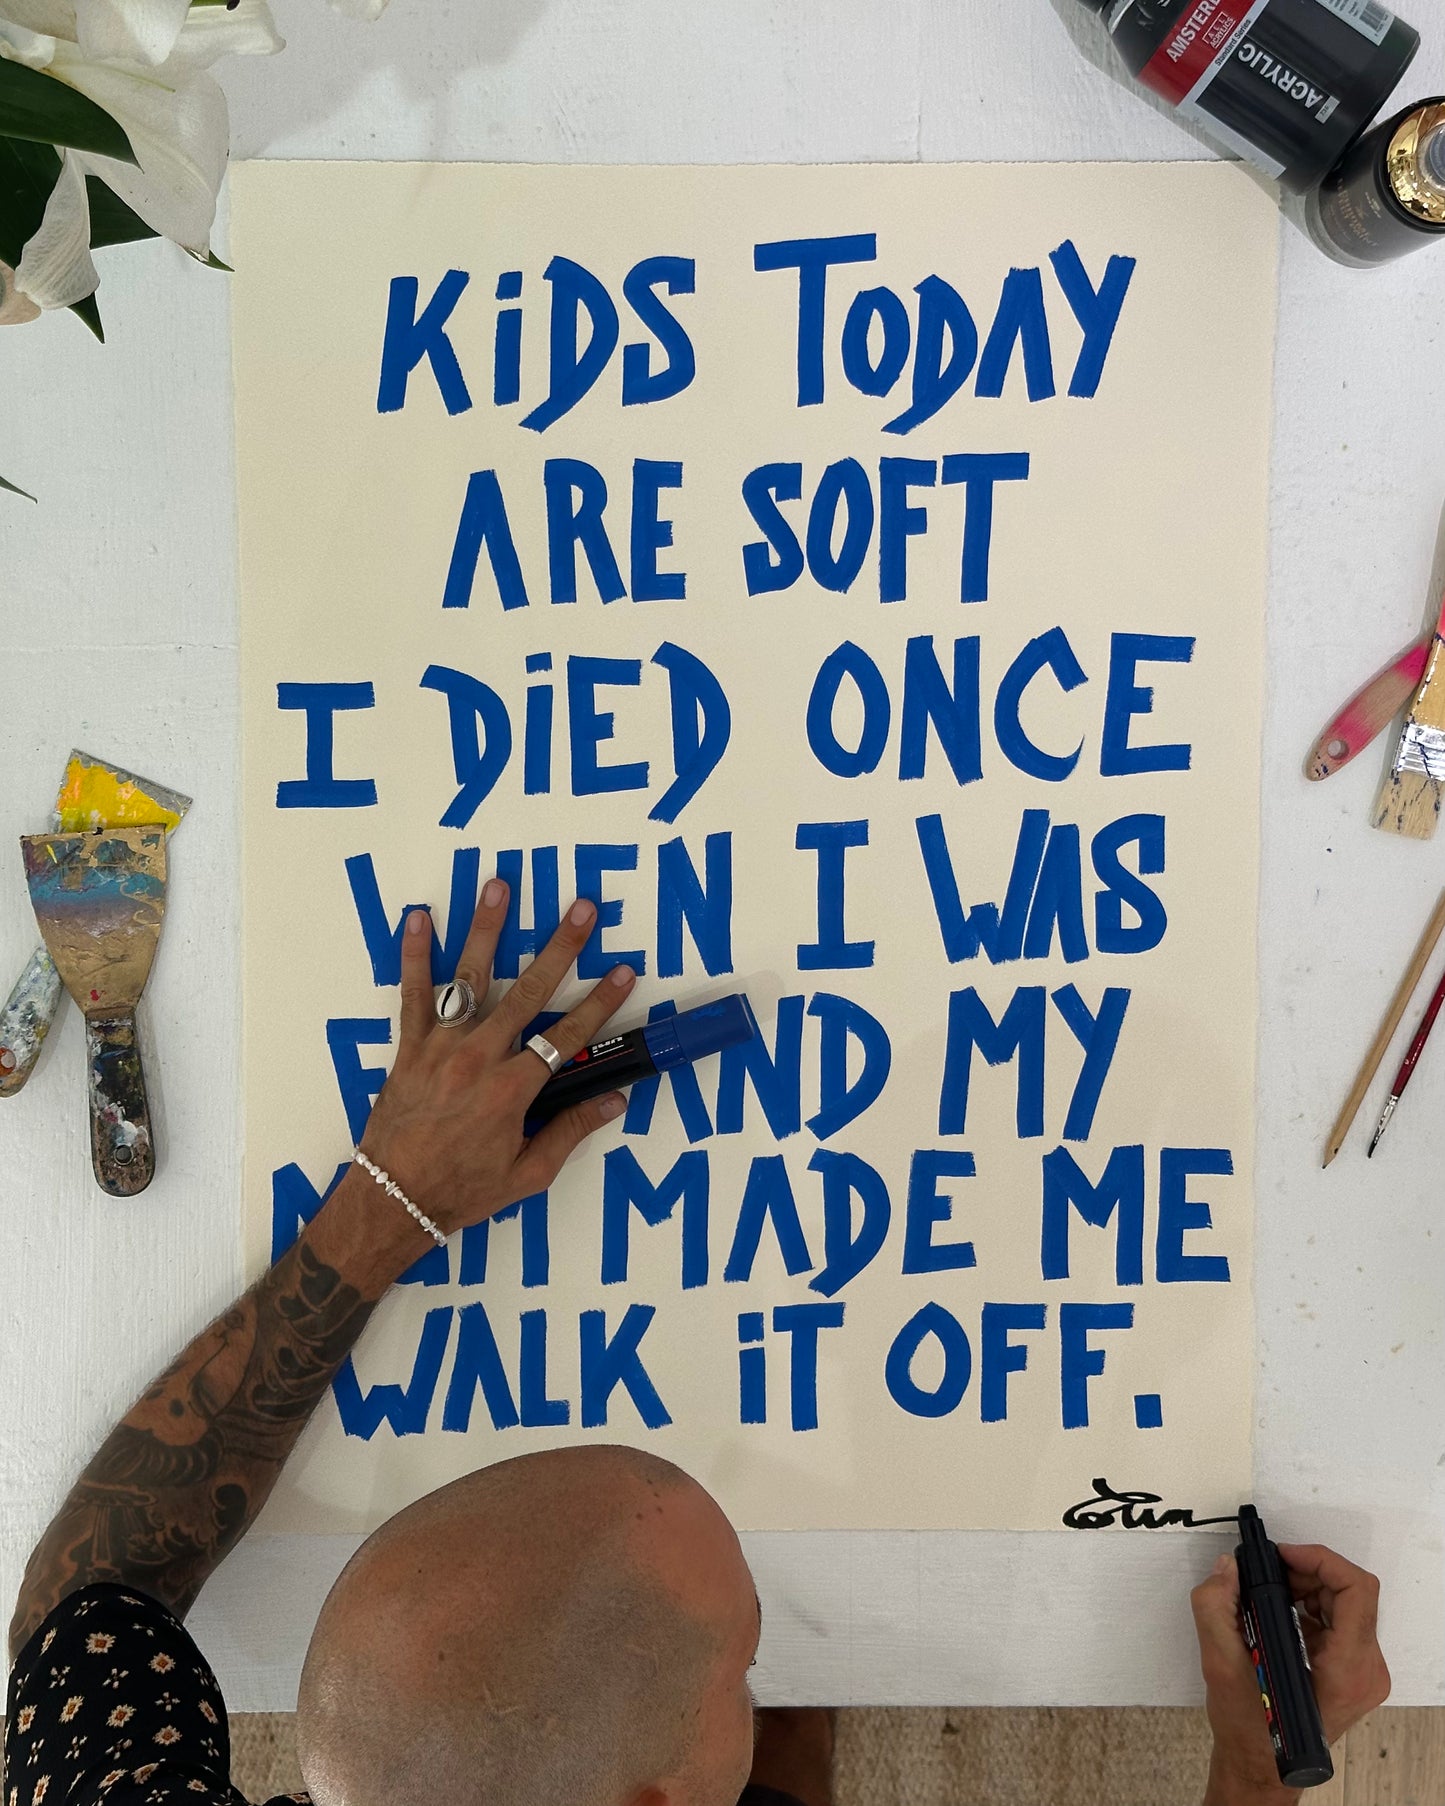 KIDS TODAY ARE SOFT....